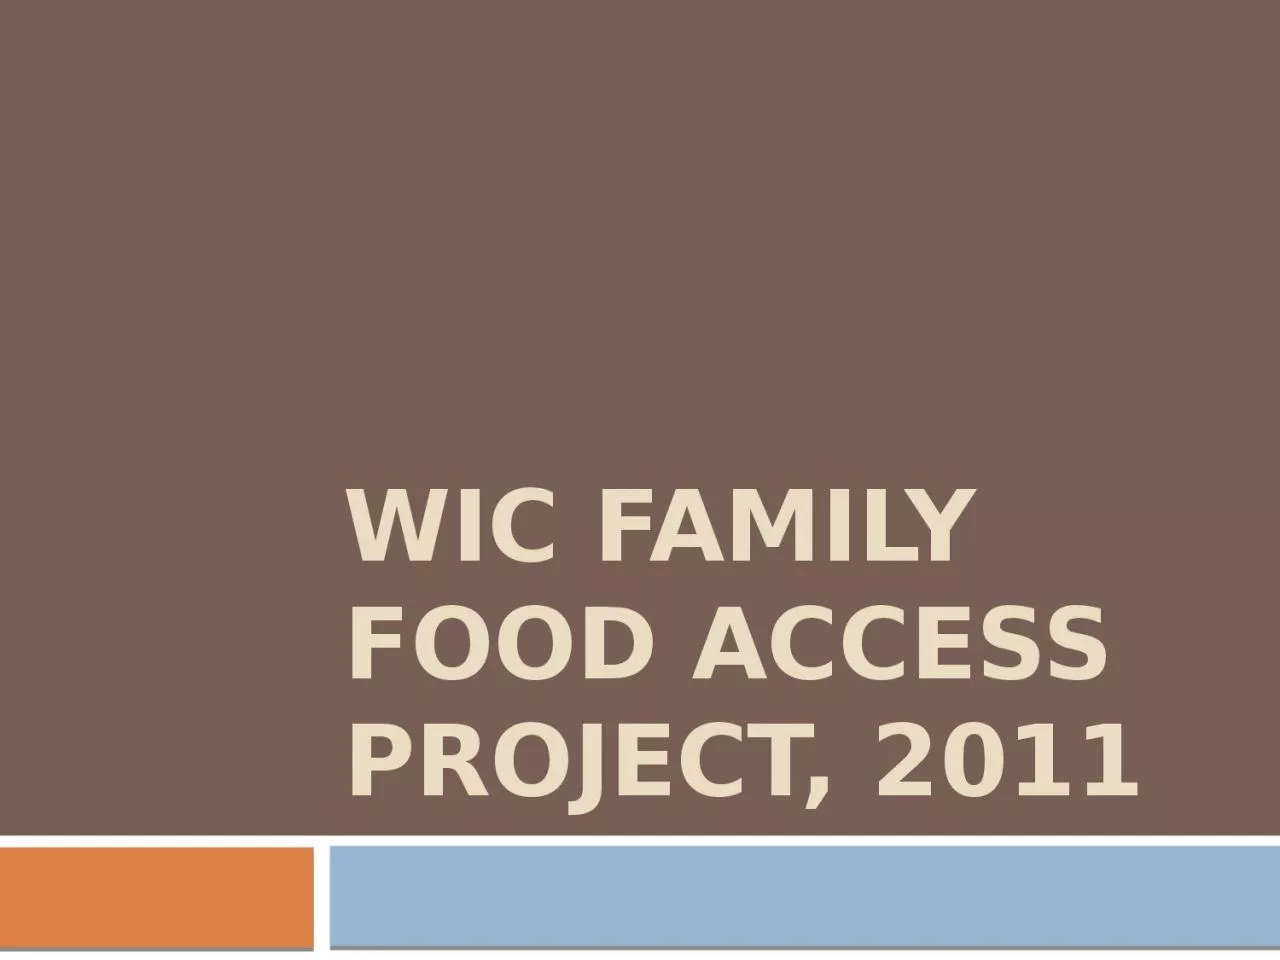 WIC Family Food Access Project, 2011